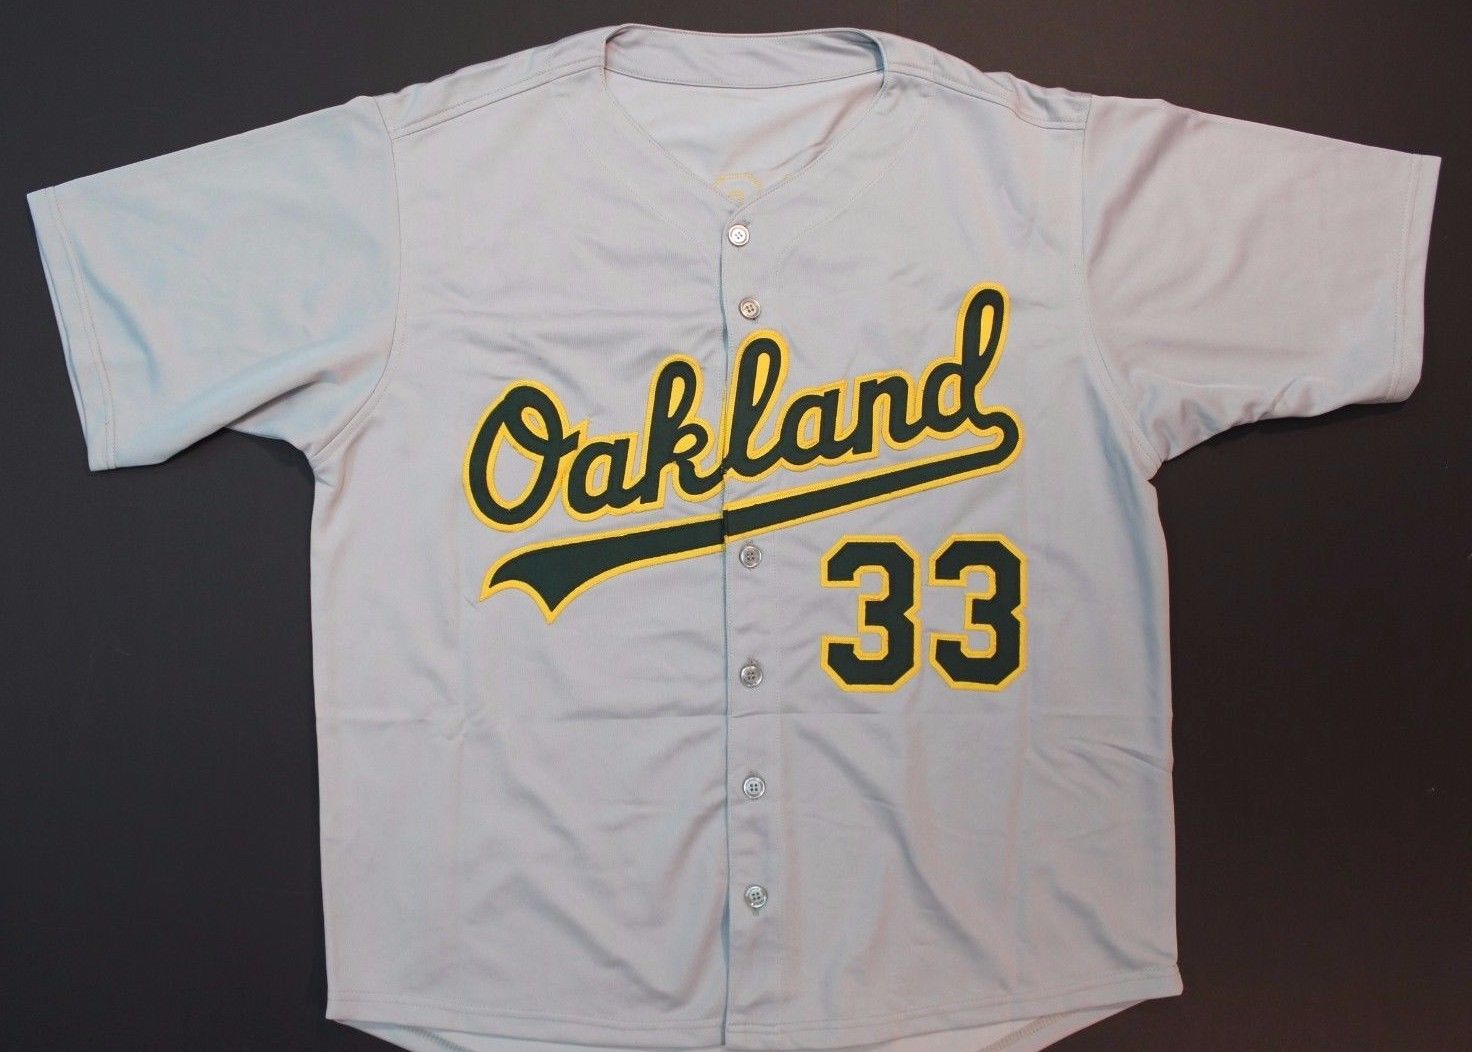 Jose Canseco Signed Autographed Oakland Athletics Baseball Jersey